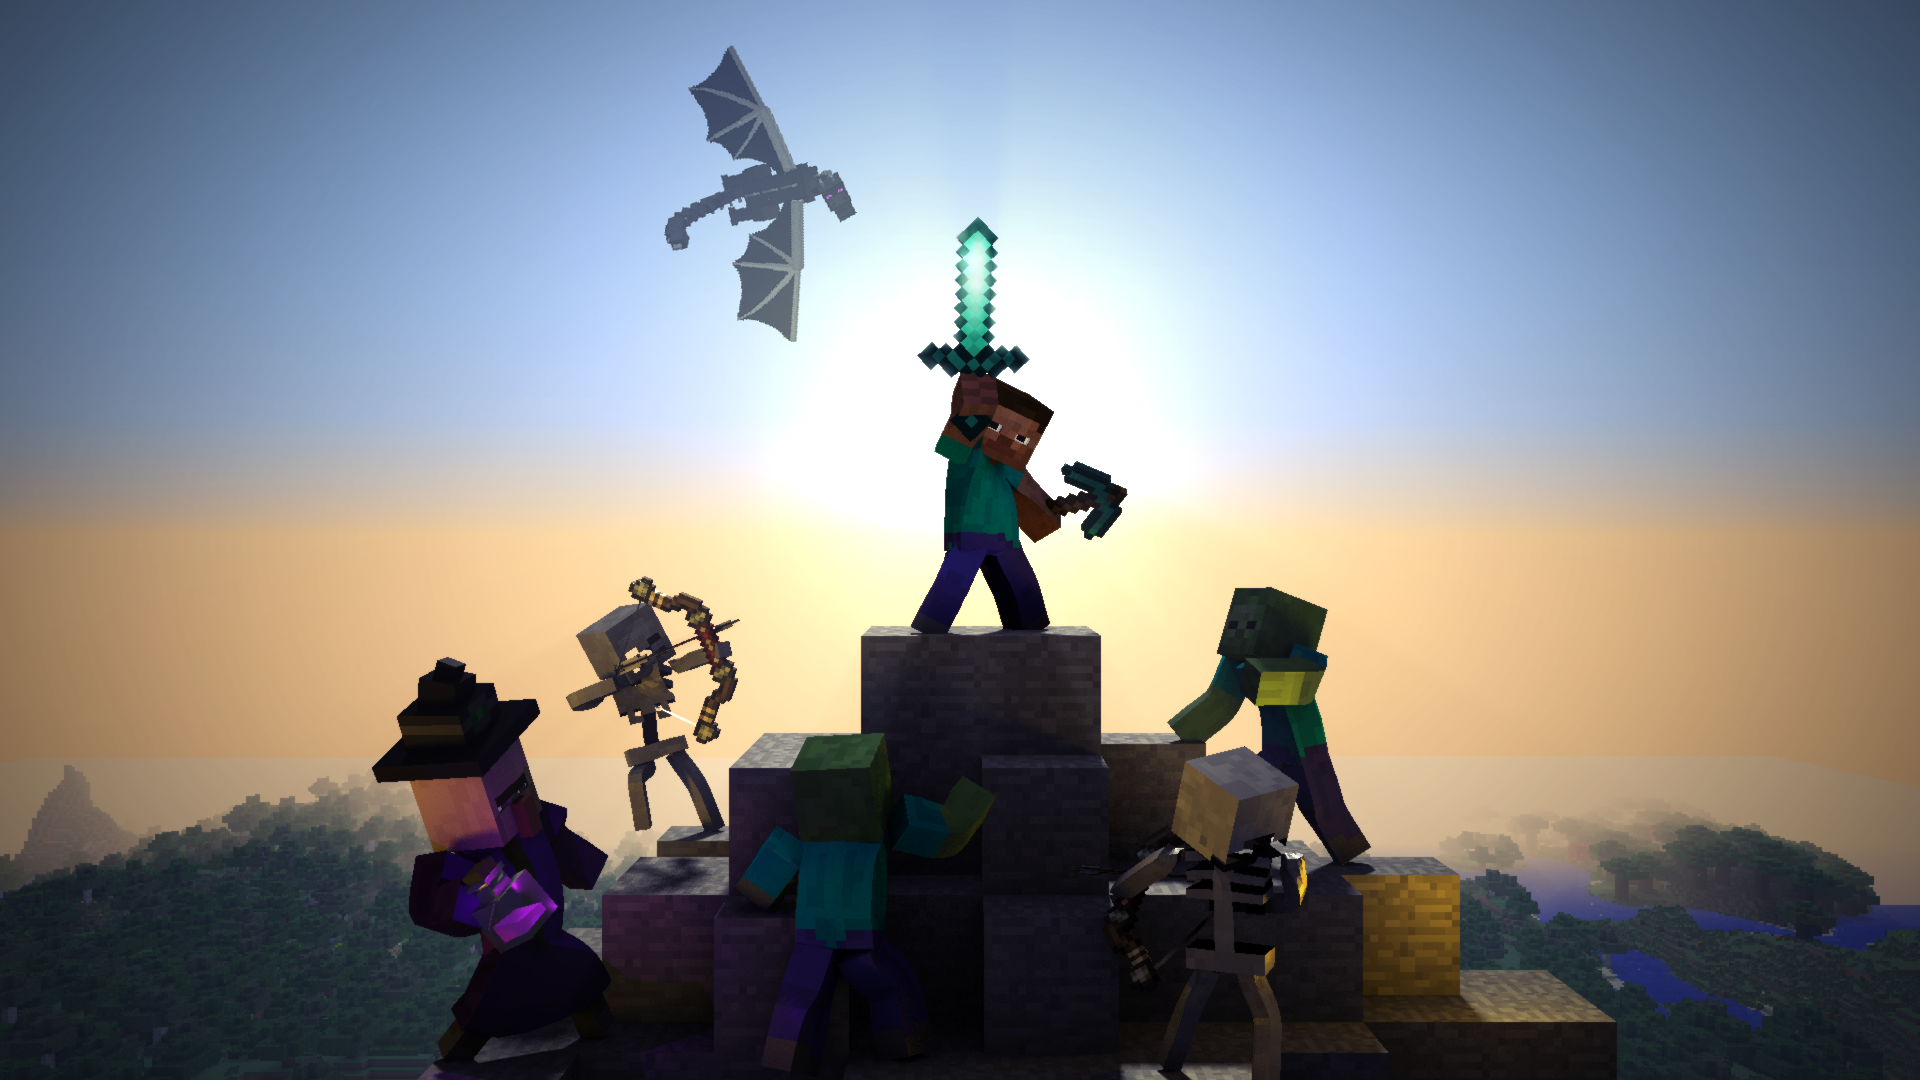 This Is A HD 3d Minecraft Wallpaper That I Worked On Used